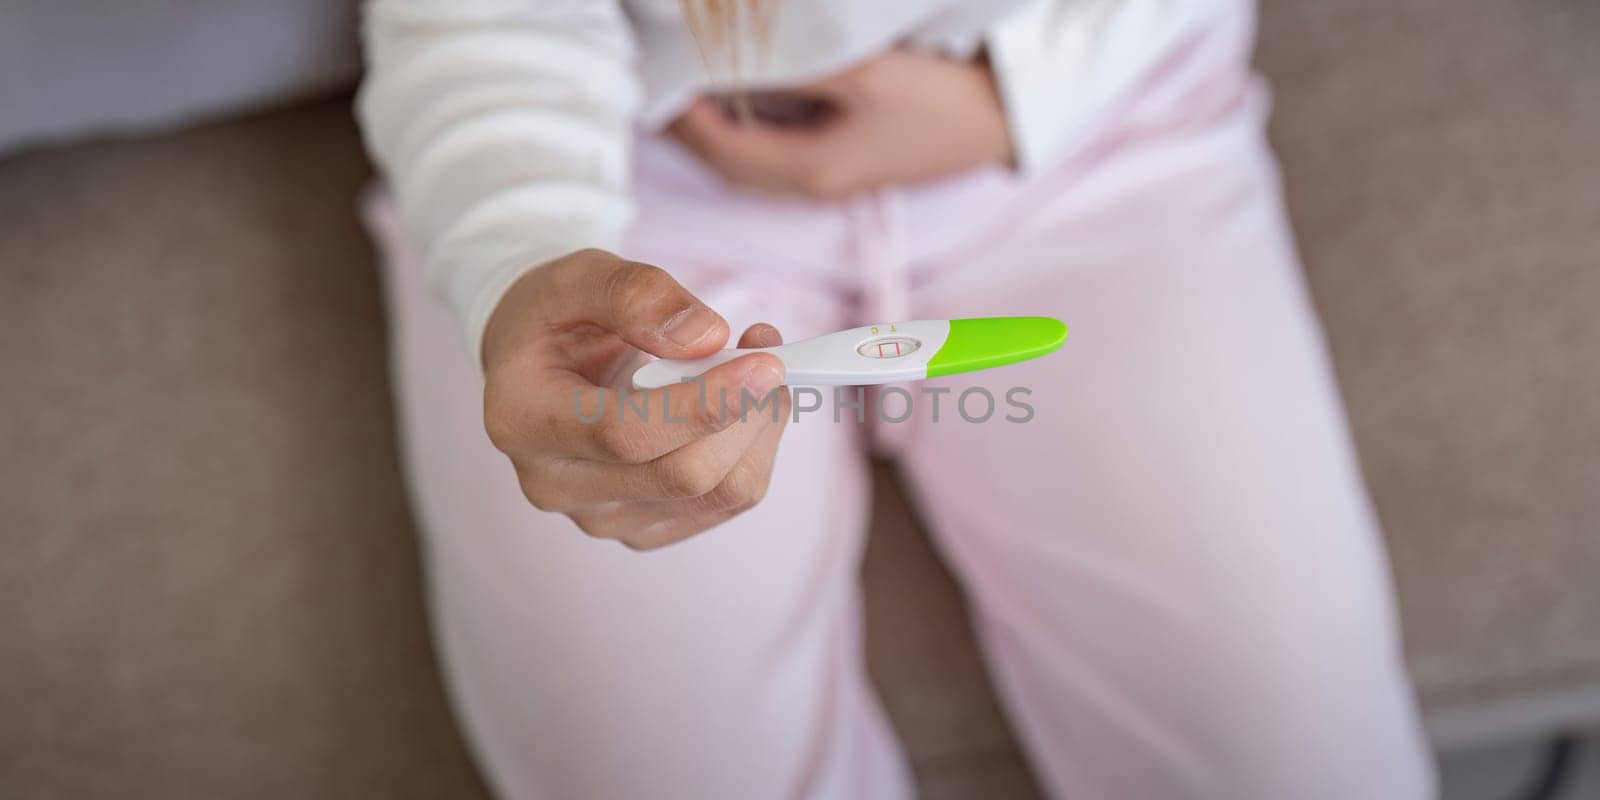 Positive pregnancy test held by woman at home, showing happiness. Concept of new beginnings and joyful discovery.